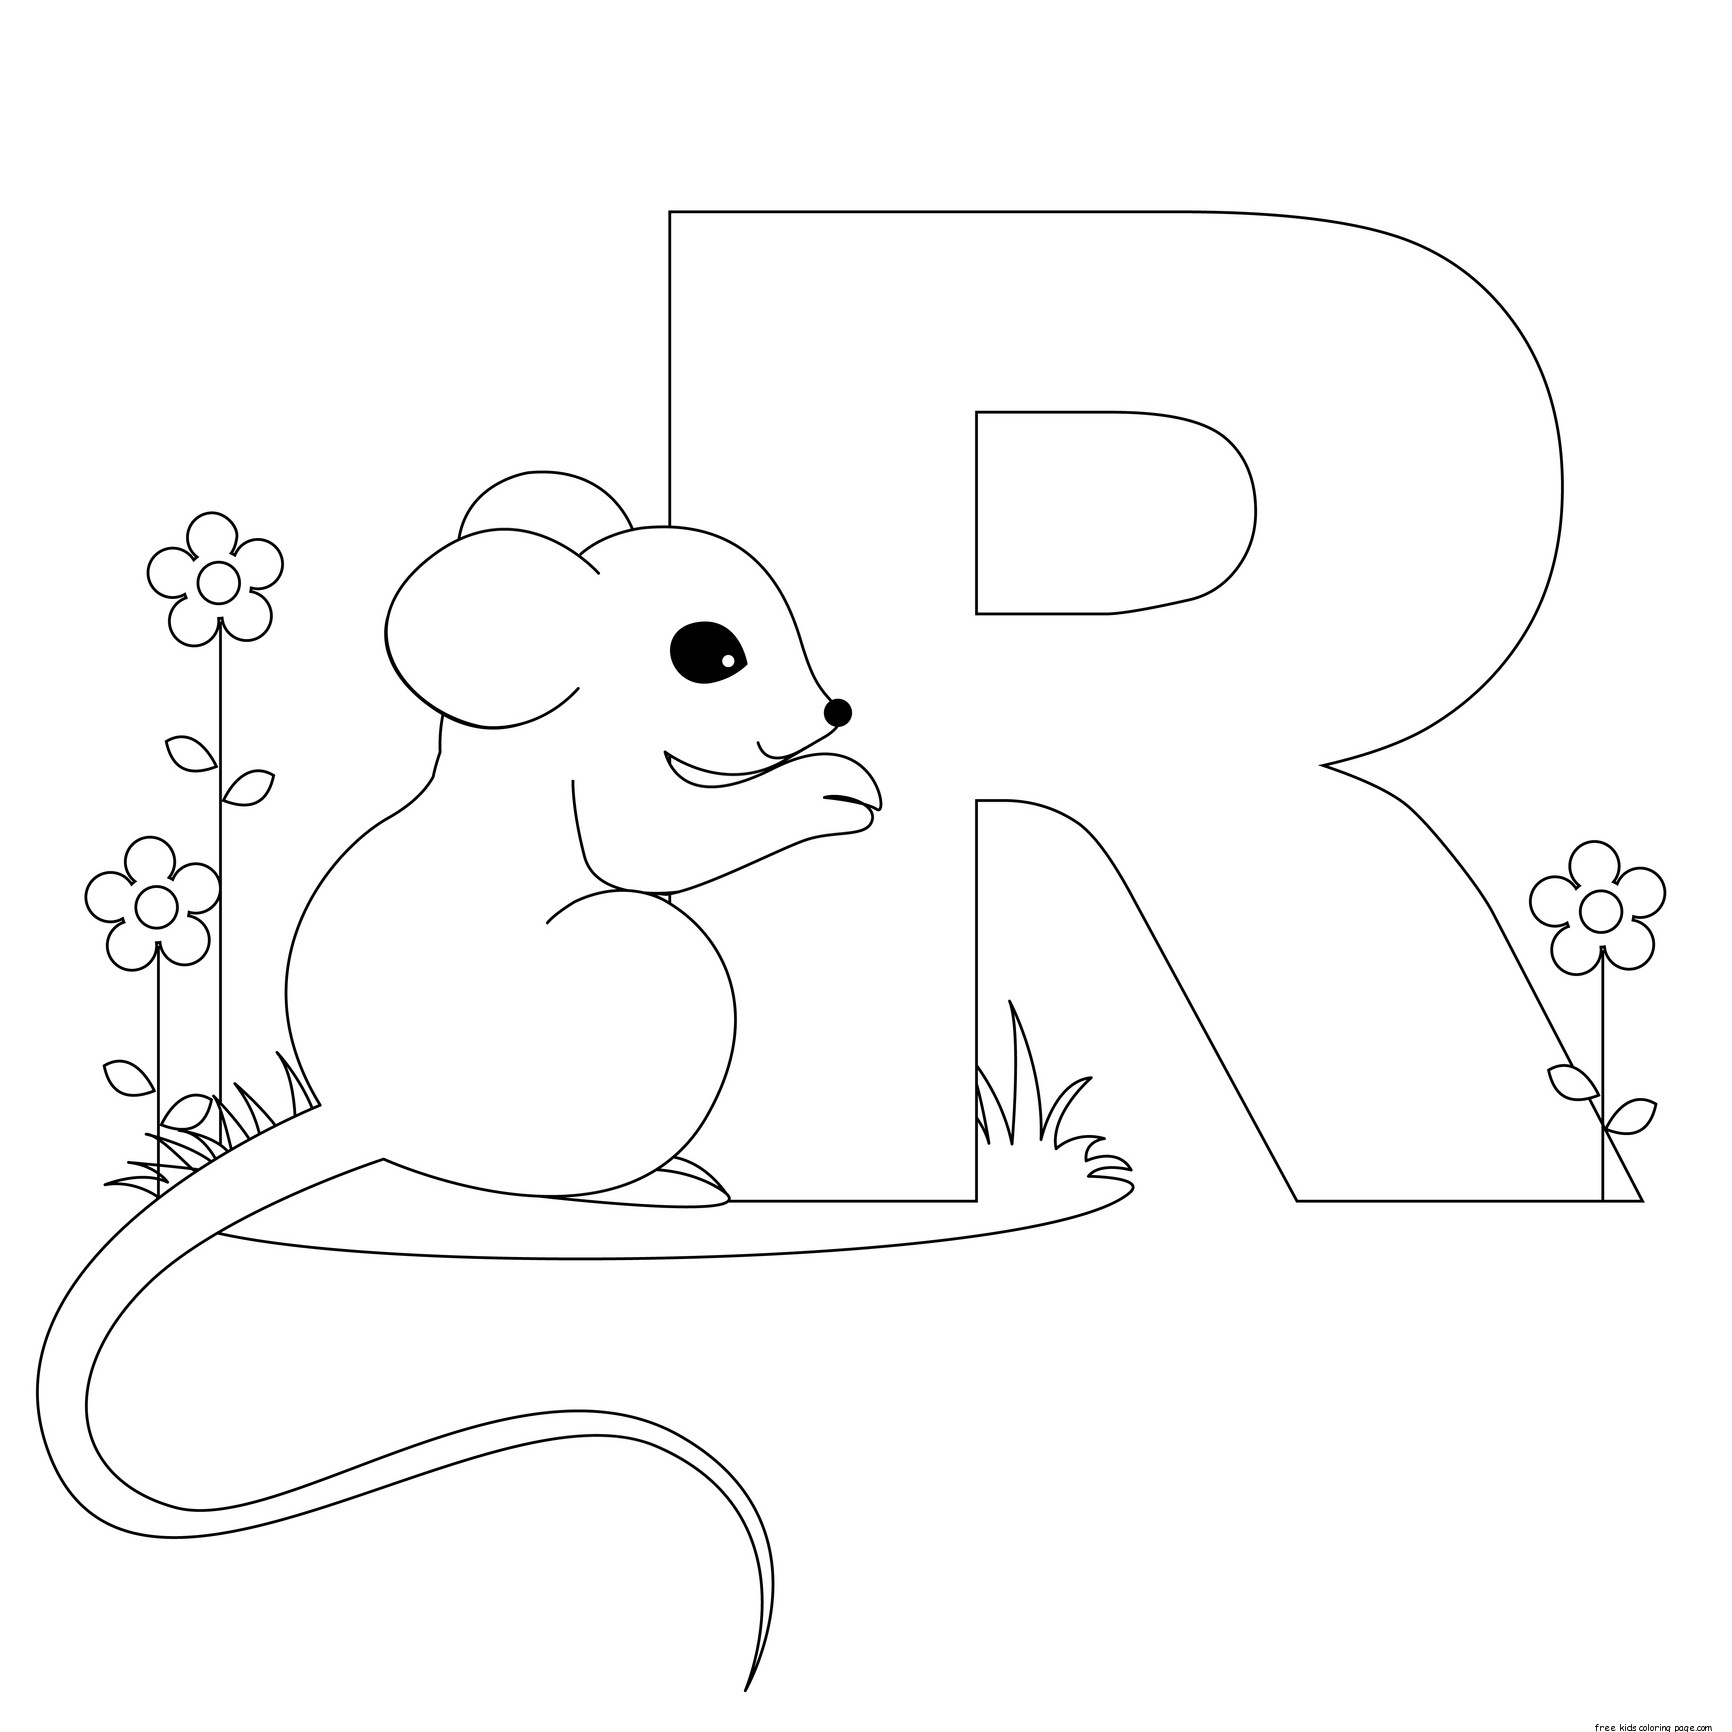 Coloring page: Alphabet (Educational) #124781 - Printable coloring pages